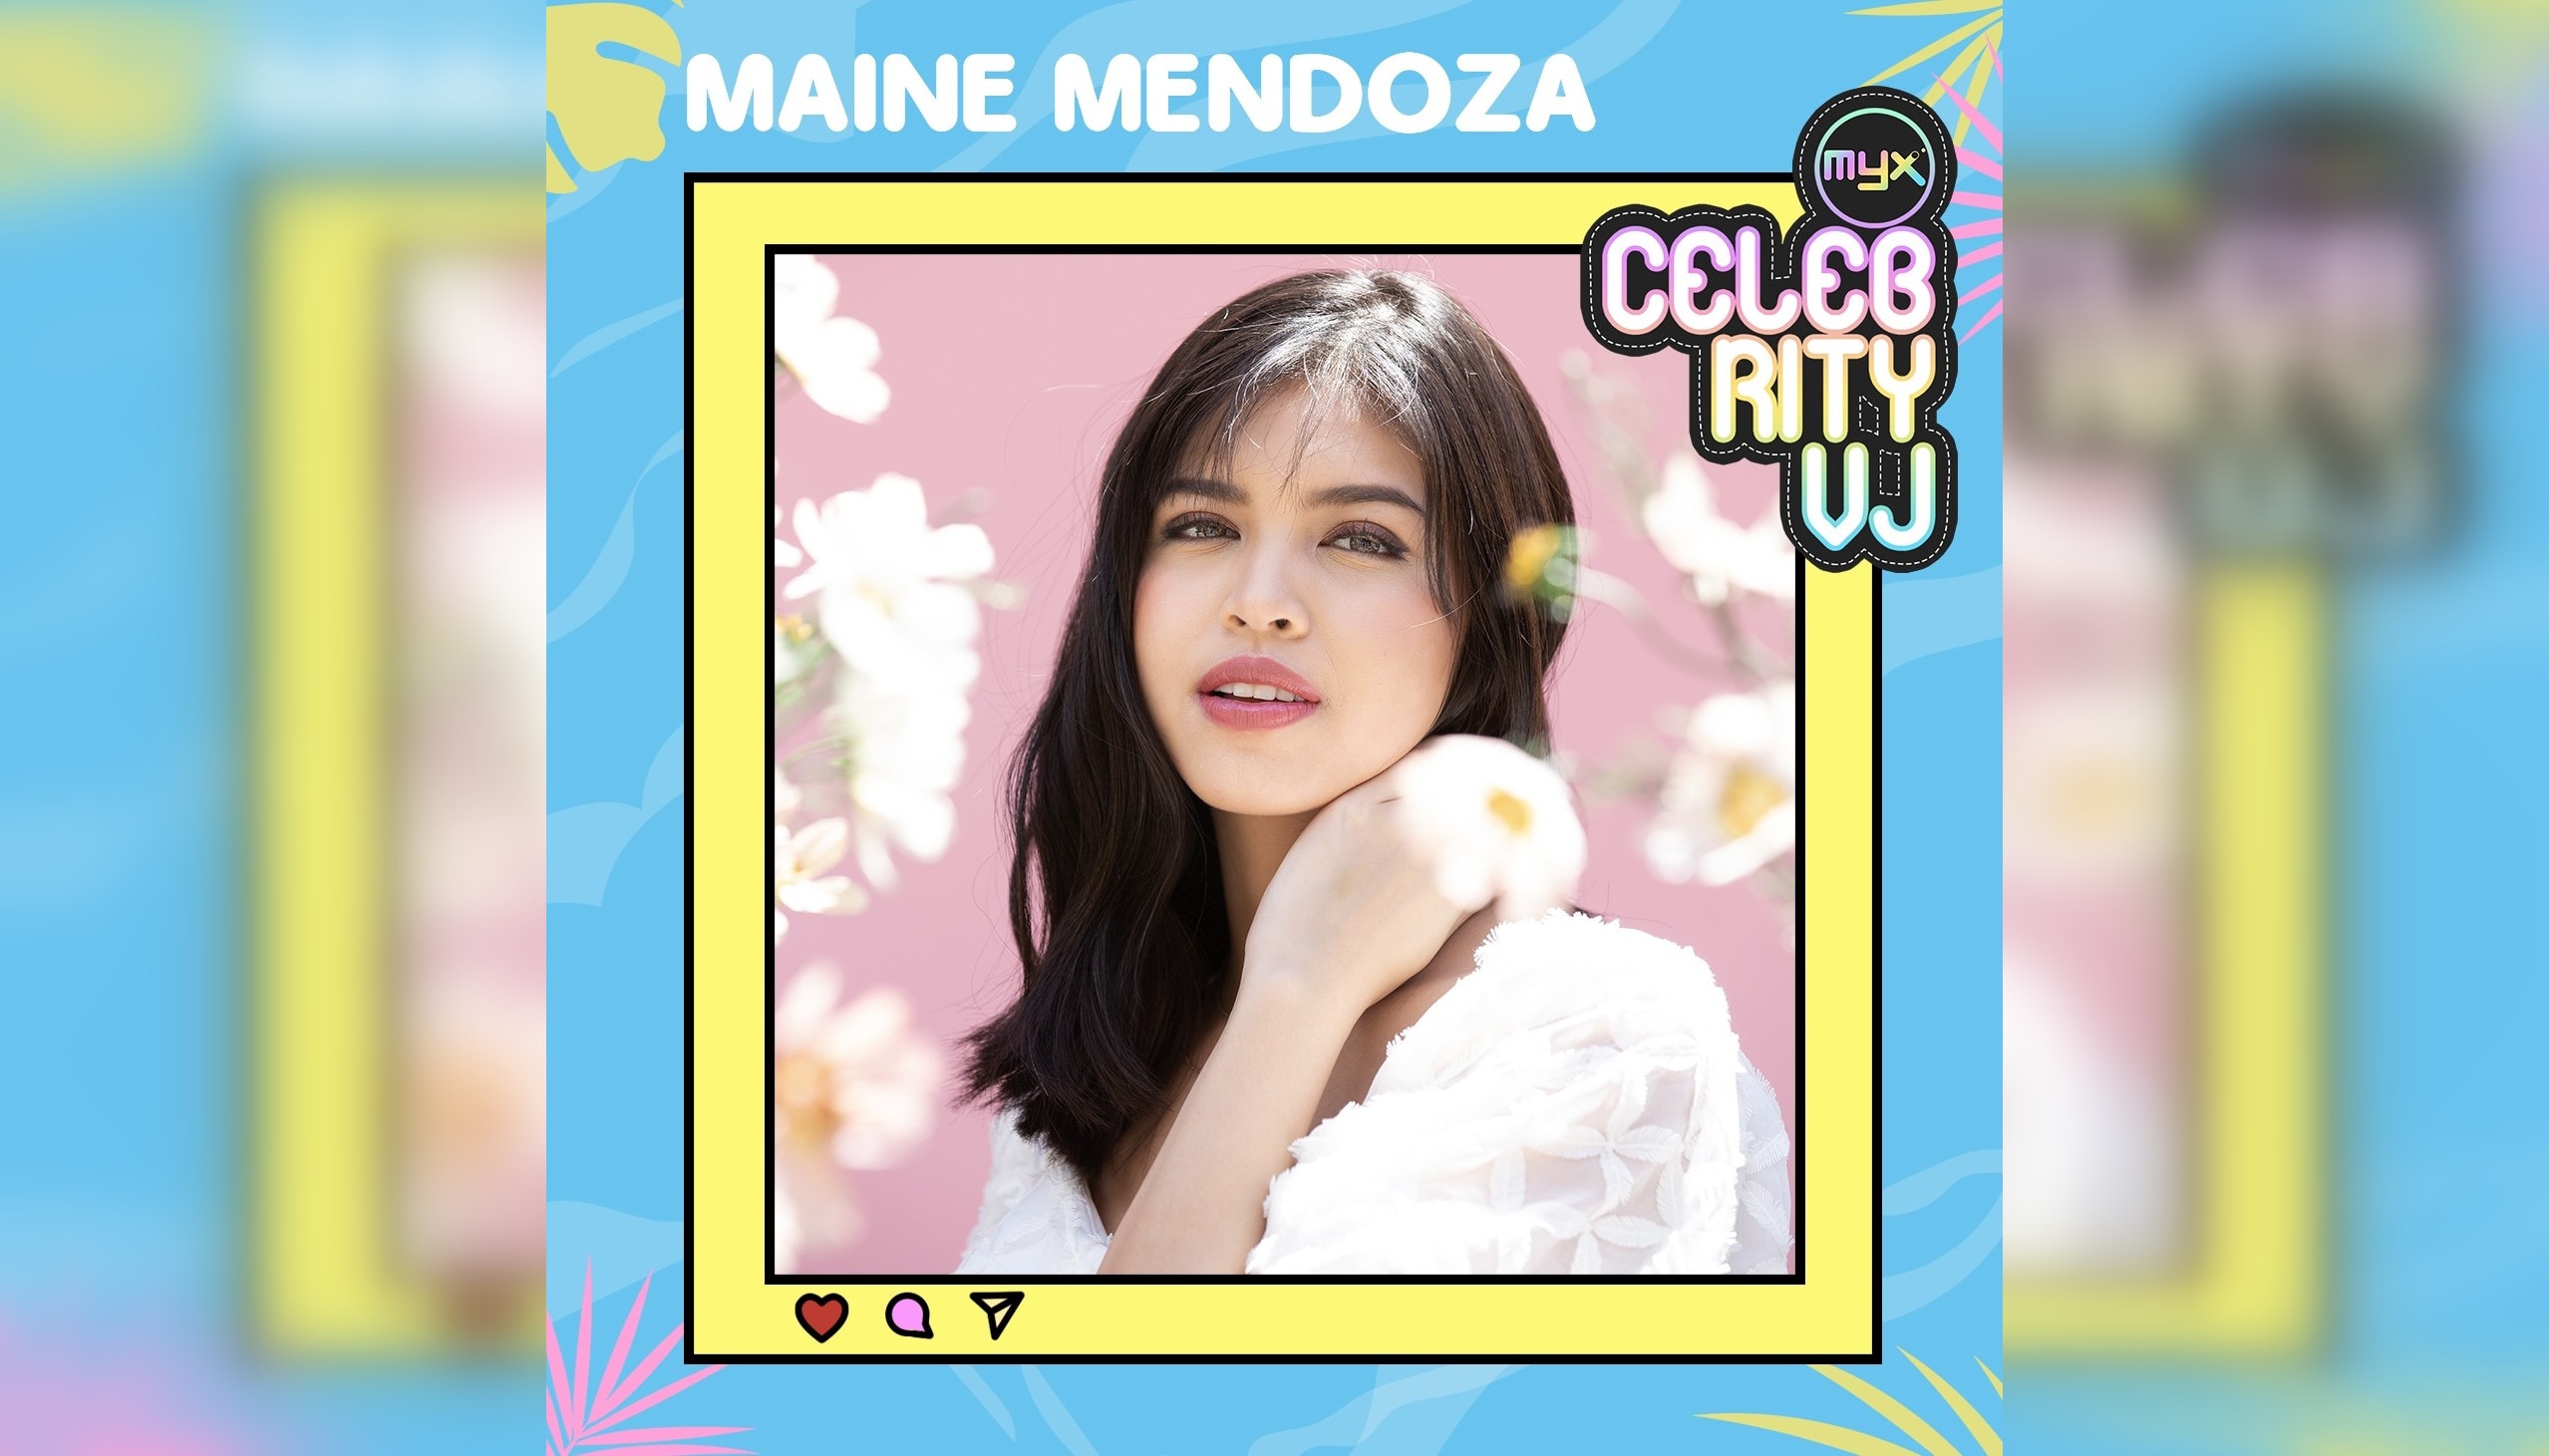 Maine Mendoza joins MYX as Celebrity VJ this April